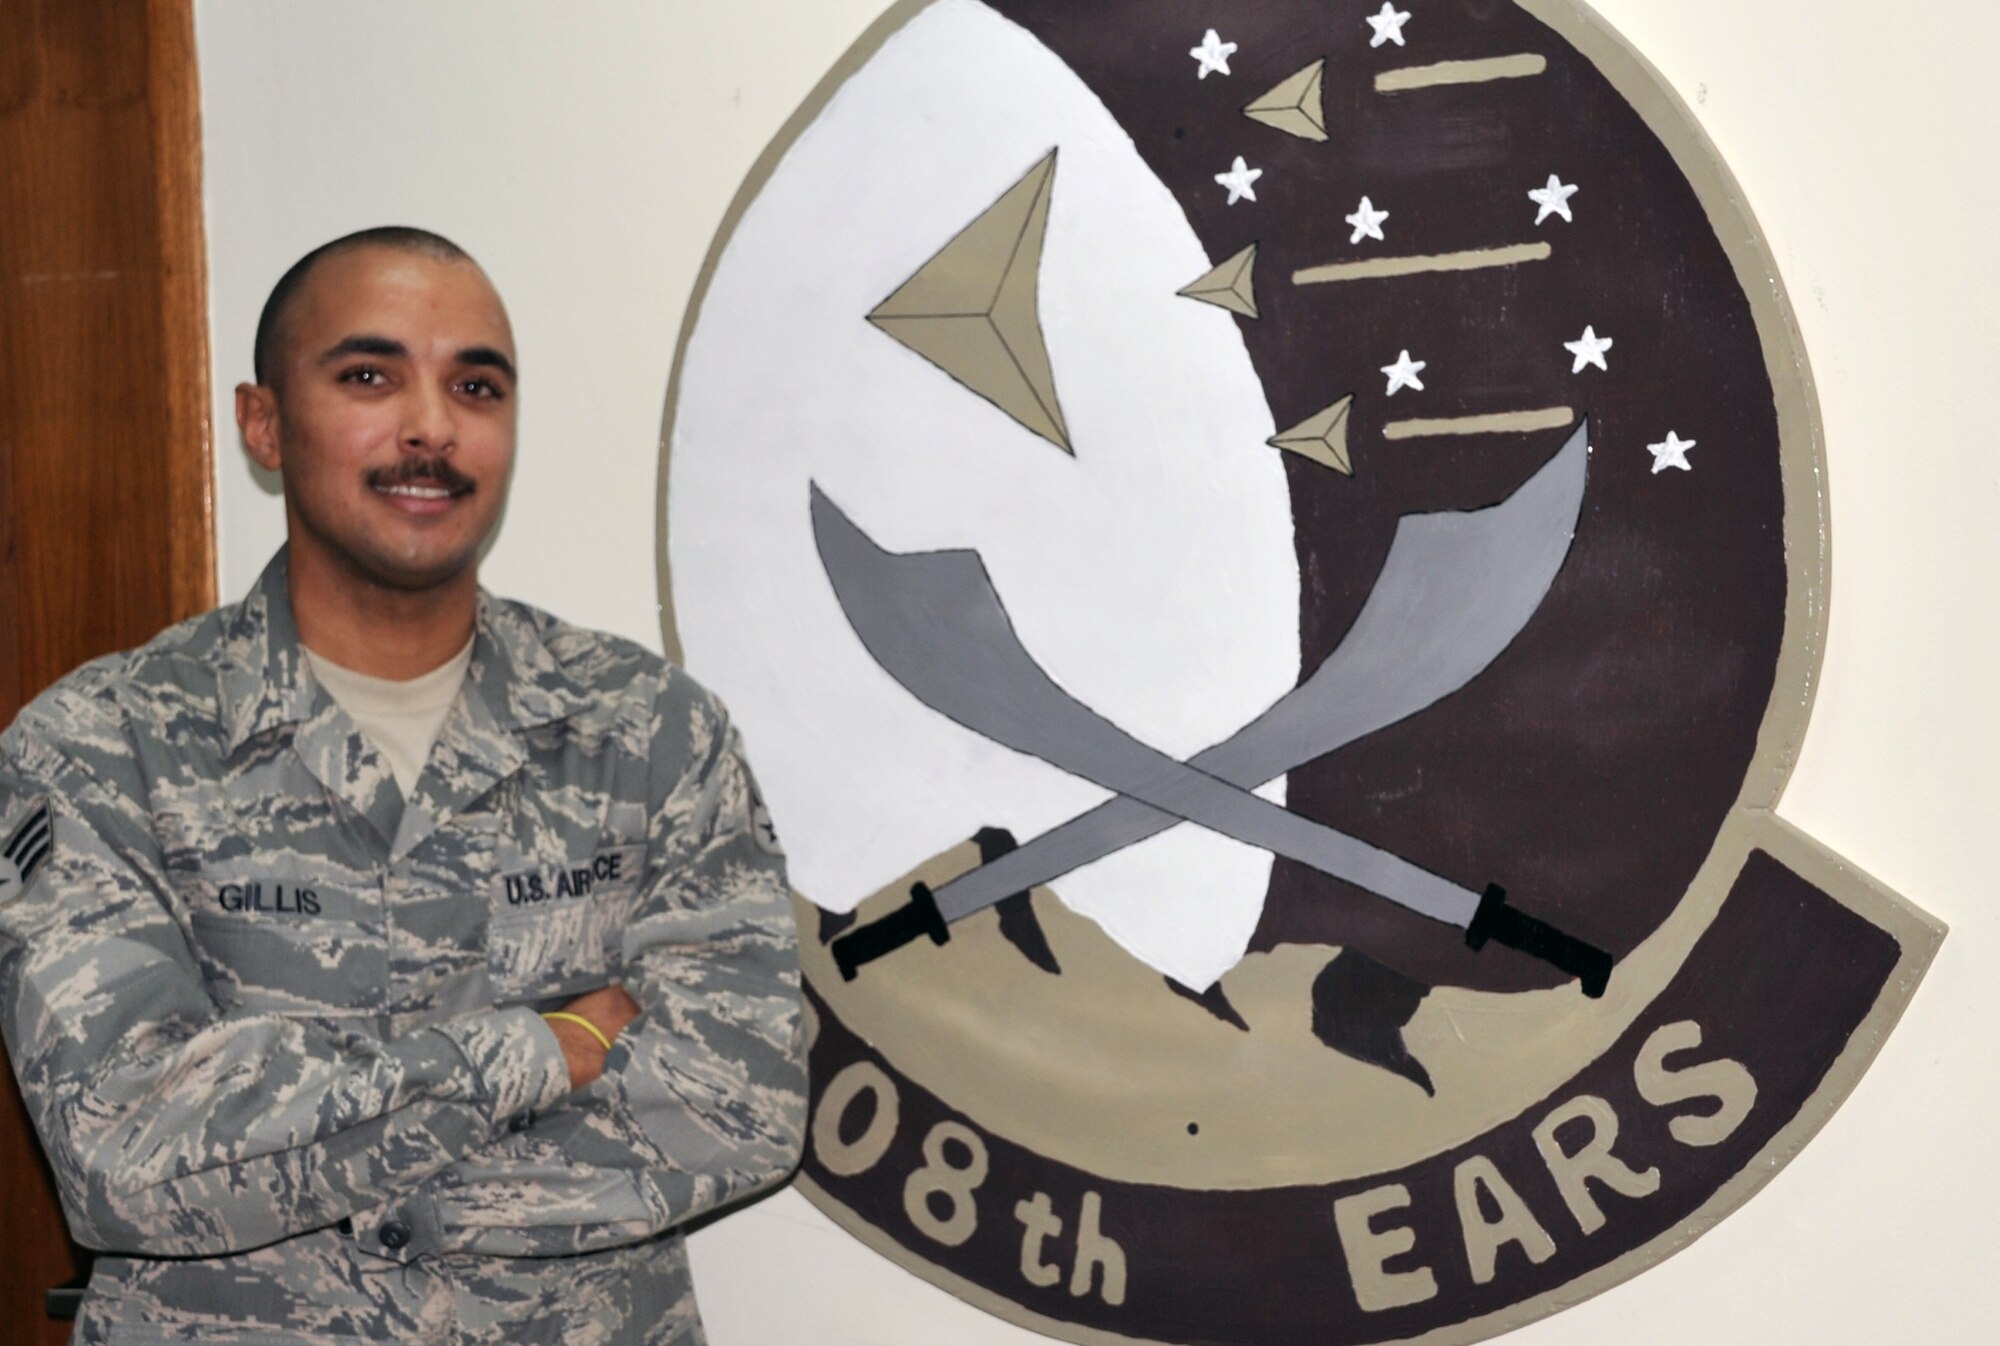 Senior Airman Christoffer Gillis is an operations intelligence journeyman deployed with the 908th Expeditionary Air Refueling Squadron. Here he is pictured on April 24, 2010. He is deployed from the 60th Operations Group at Travis Air Force Base, Calif. 